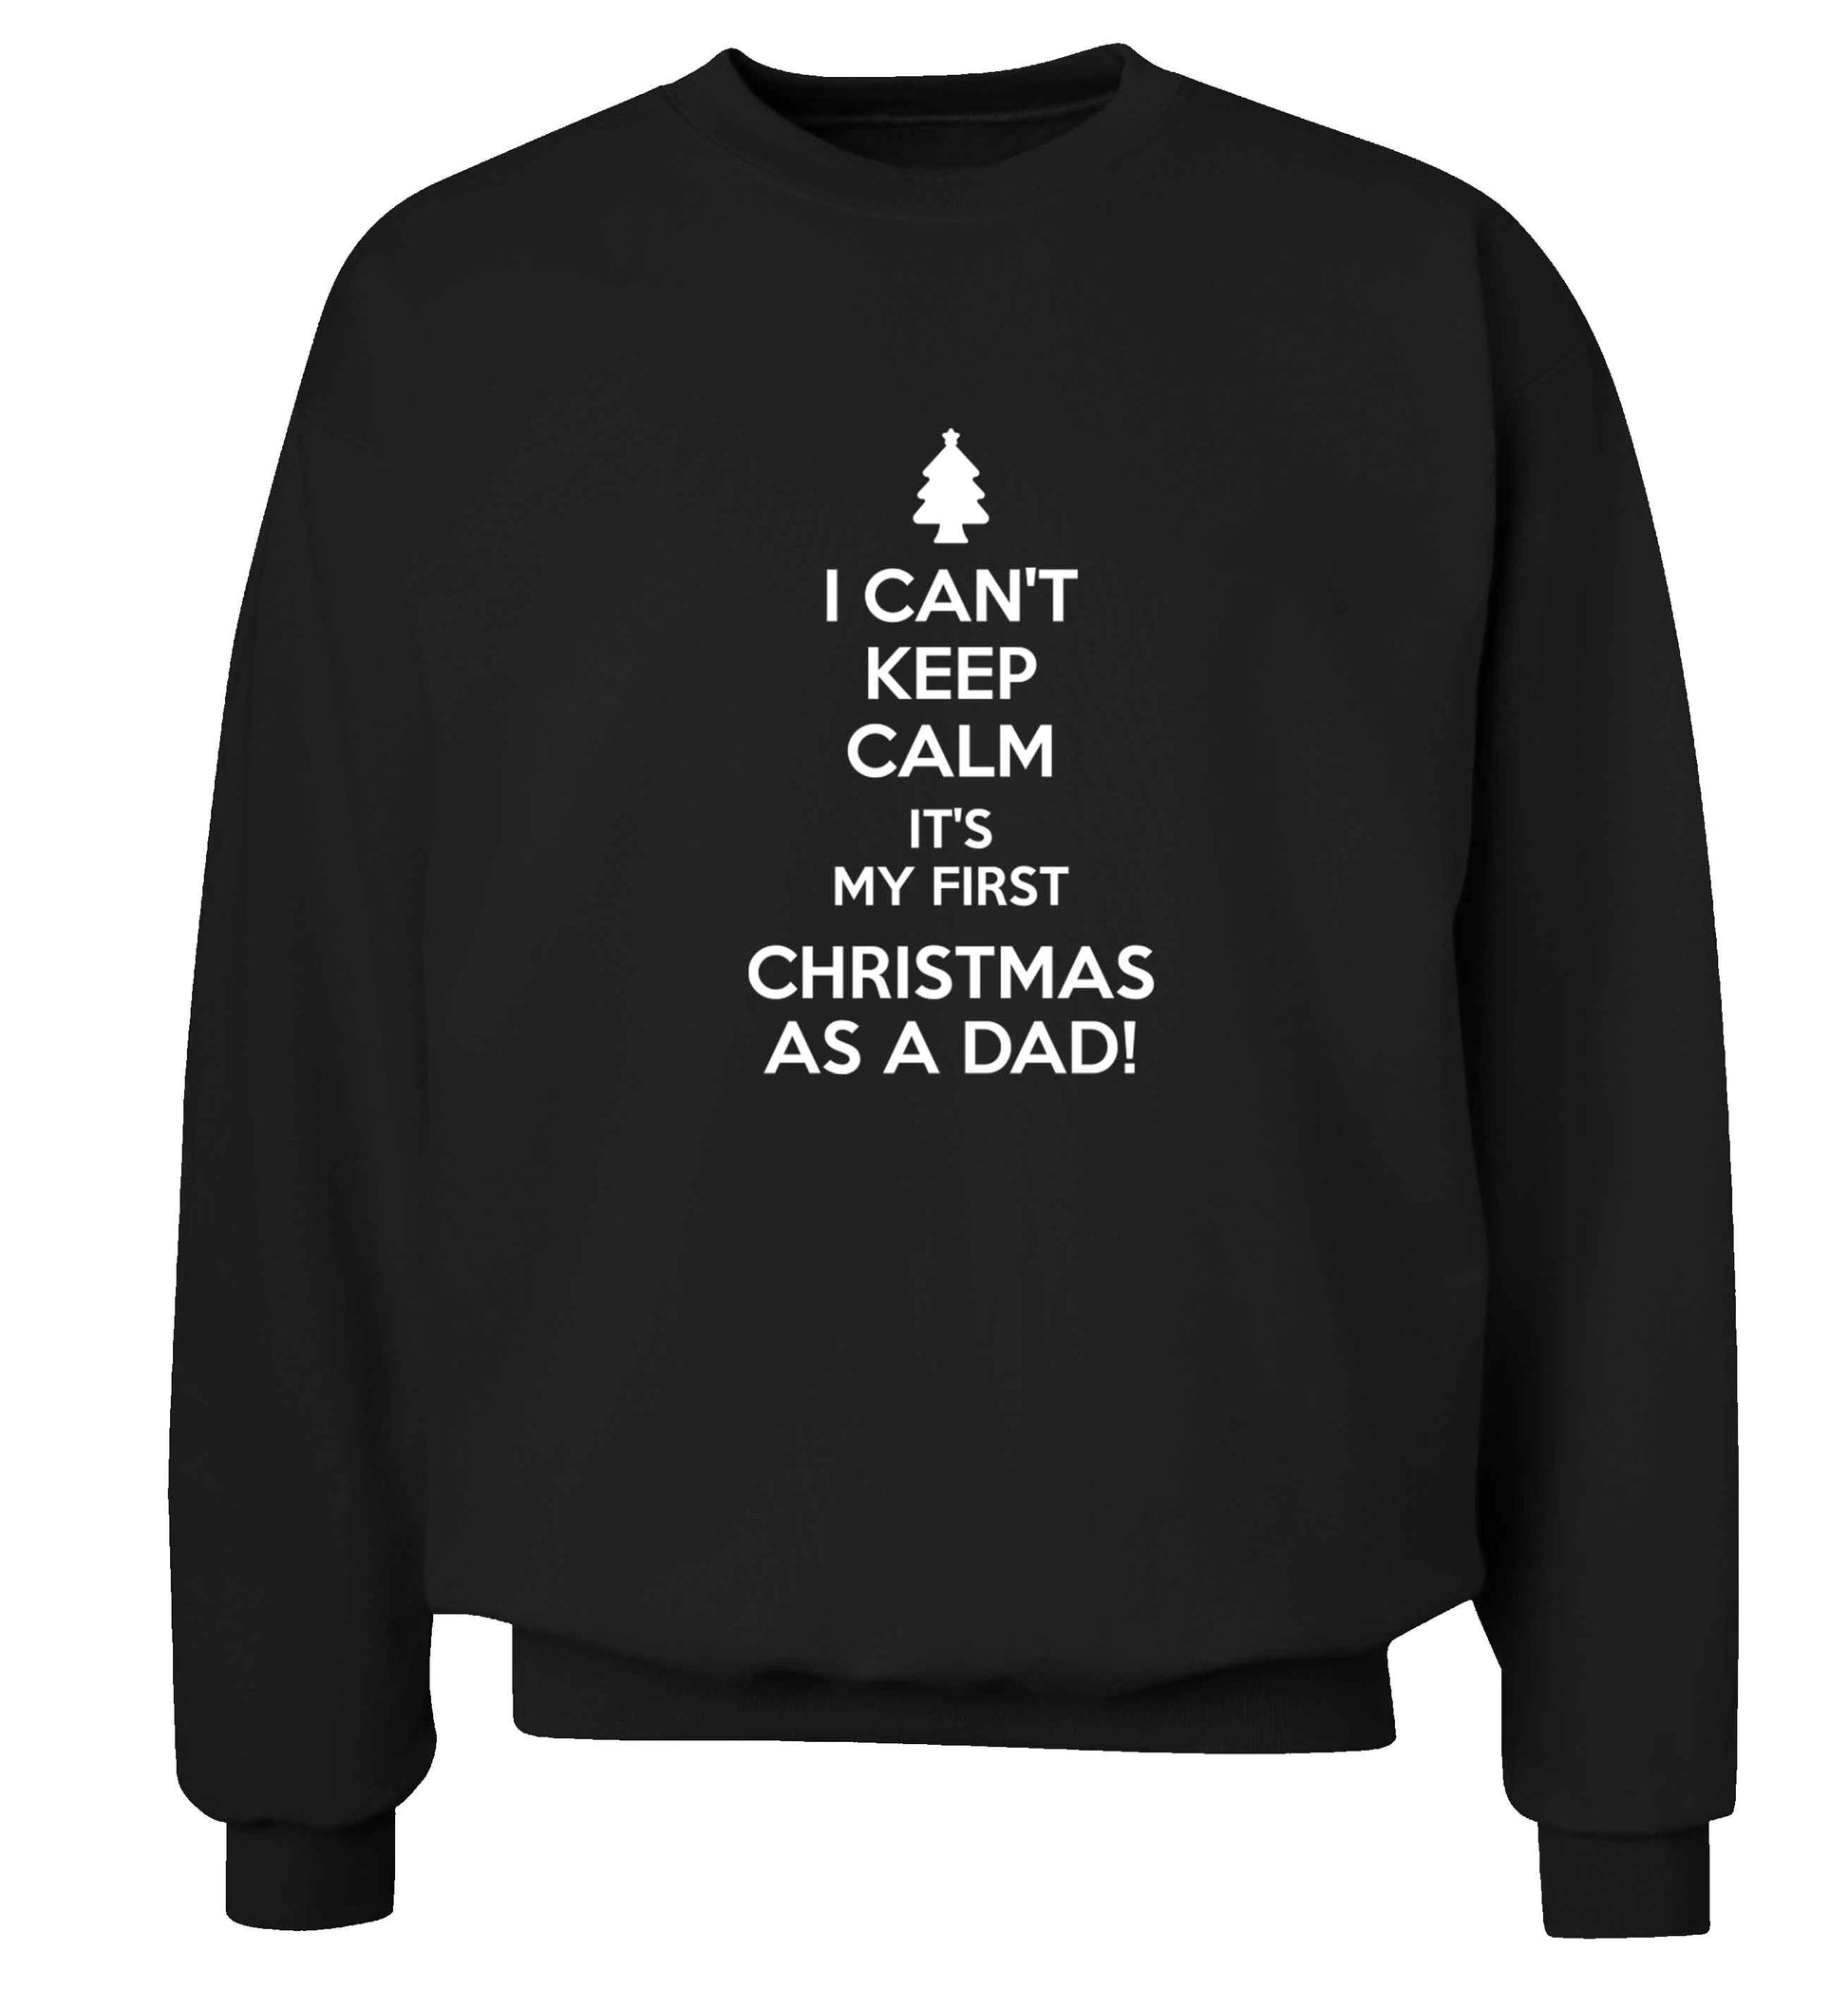 I can't keep calm it's my first Christmas as a dad Adult's unisex black Sweater 2XL